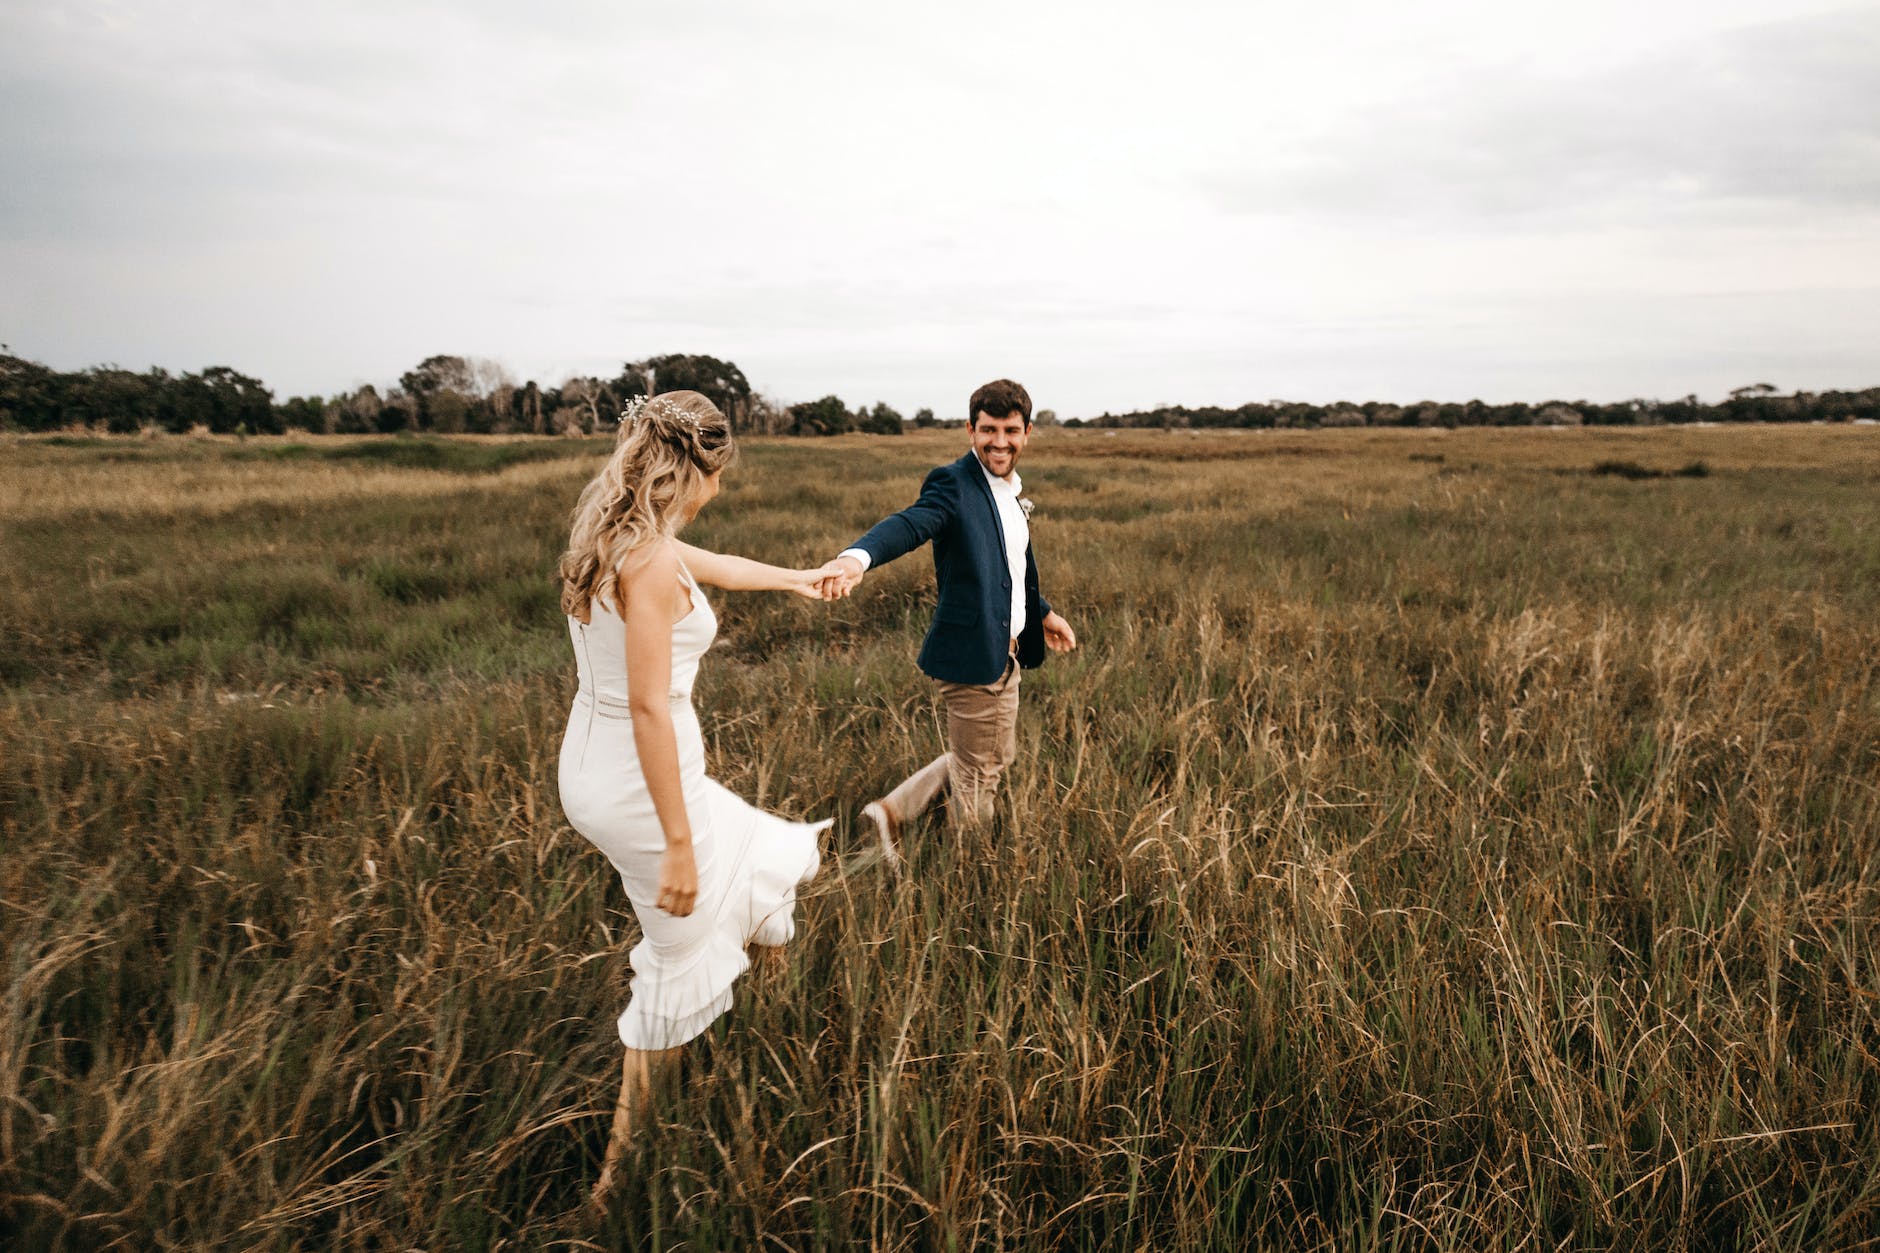 outdoor couple photoshoot - A bride and groom walking through a field of tall grass.